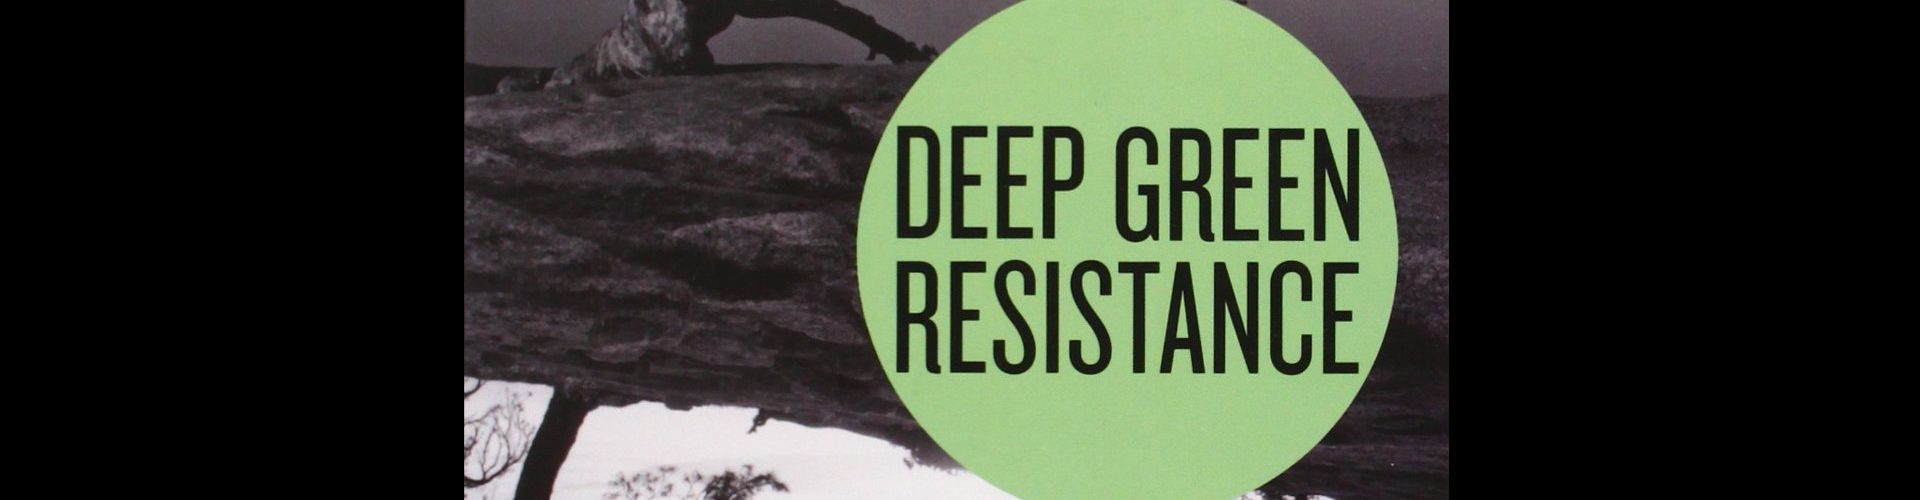 Culture of Resistance: Ecofascism and Lessons from the German Experience